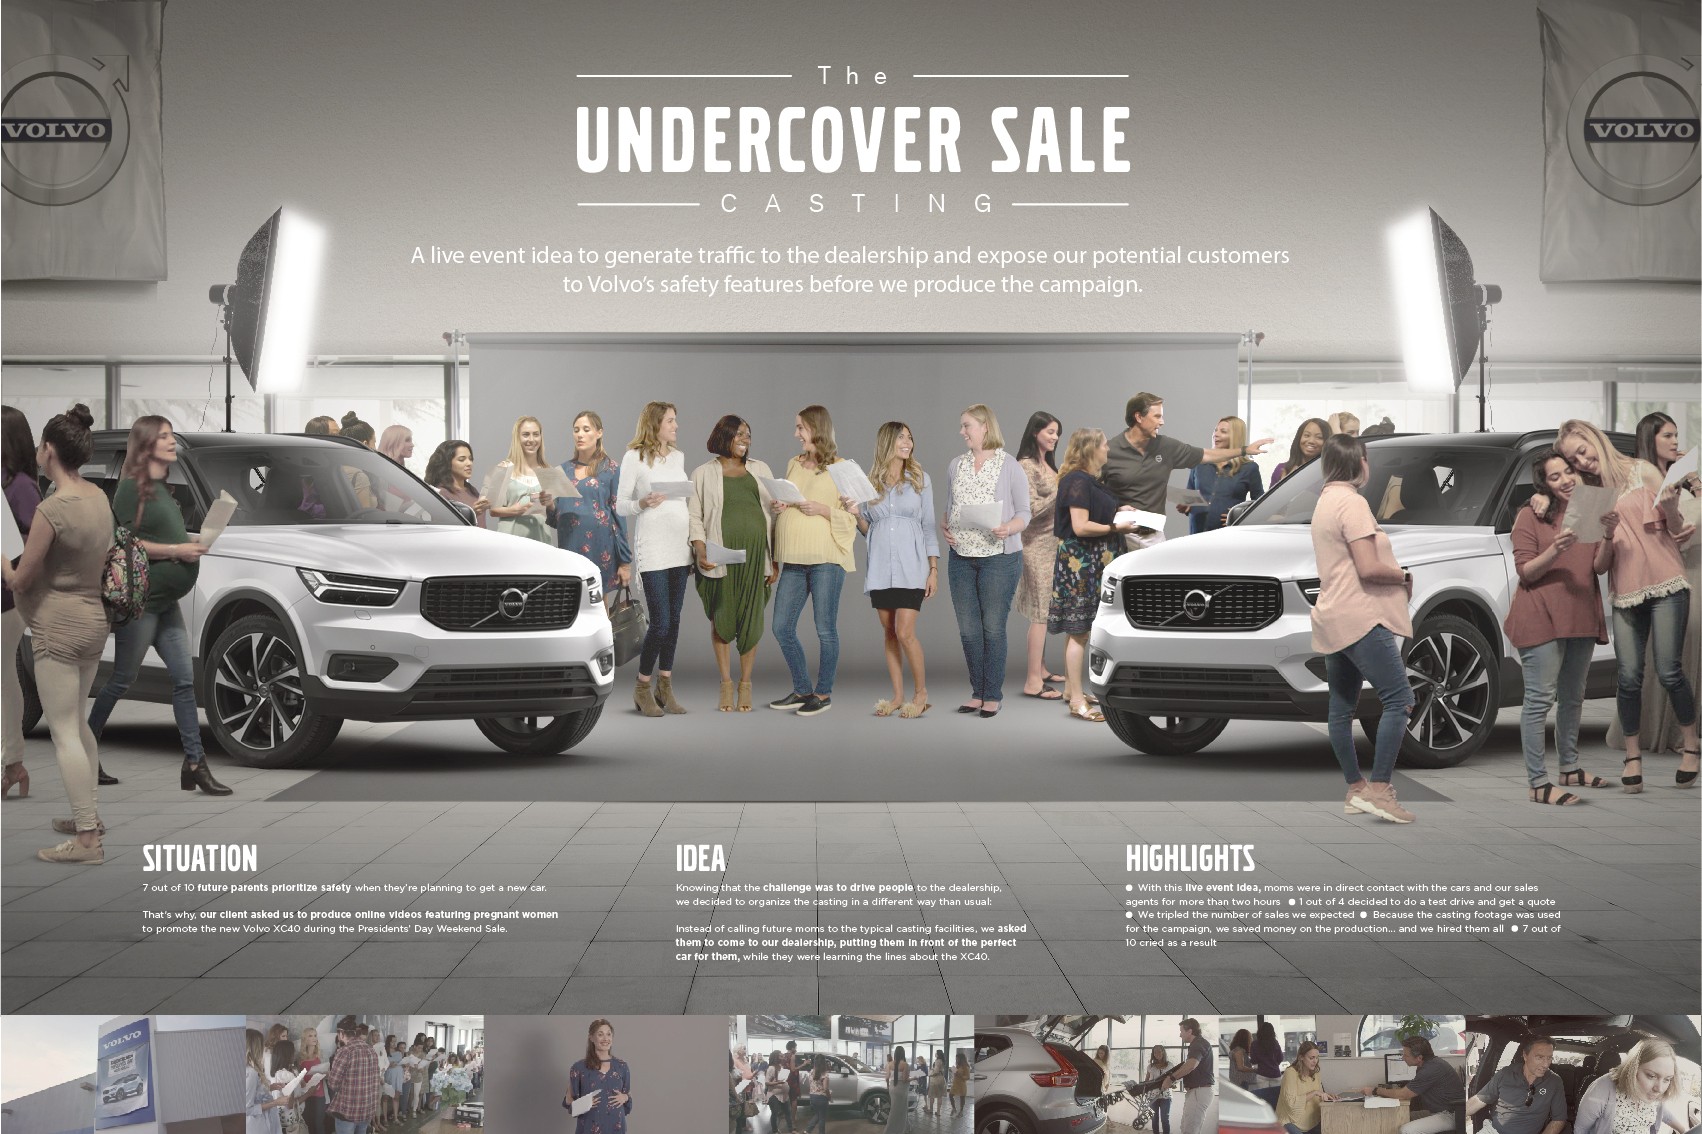 Undercover Sale Casting